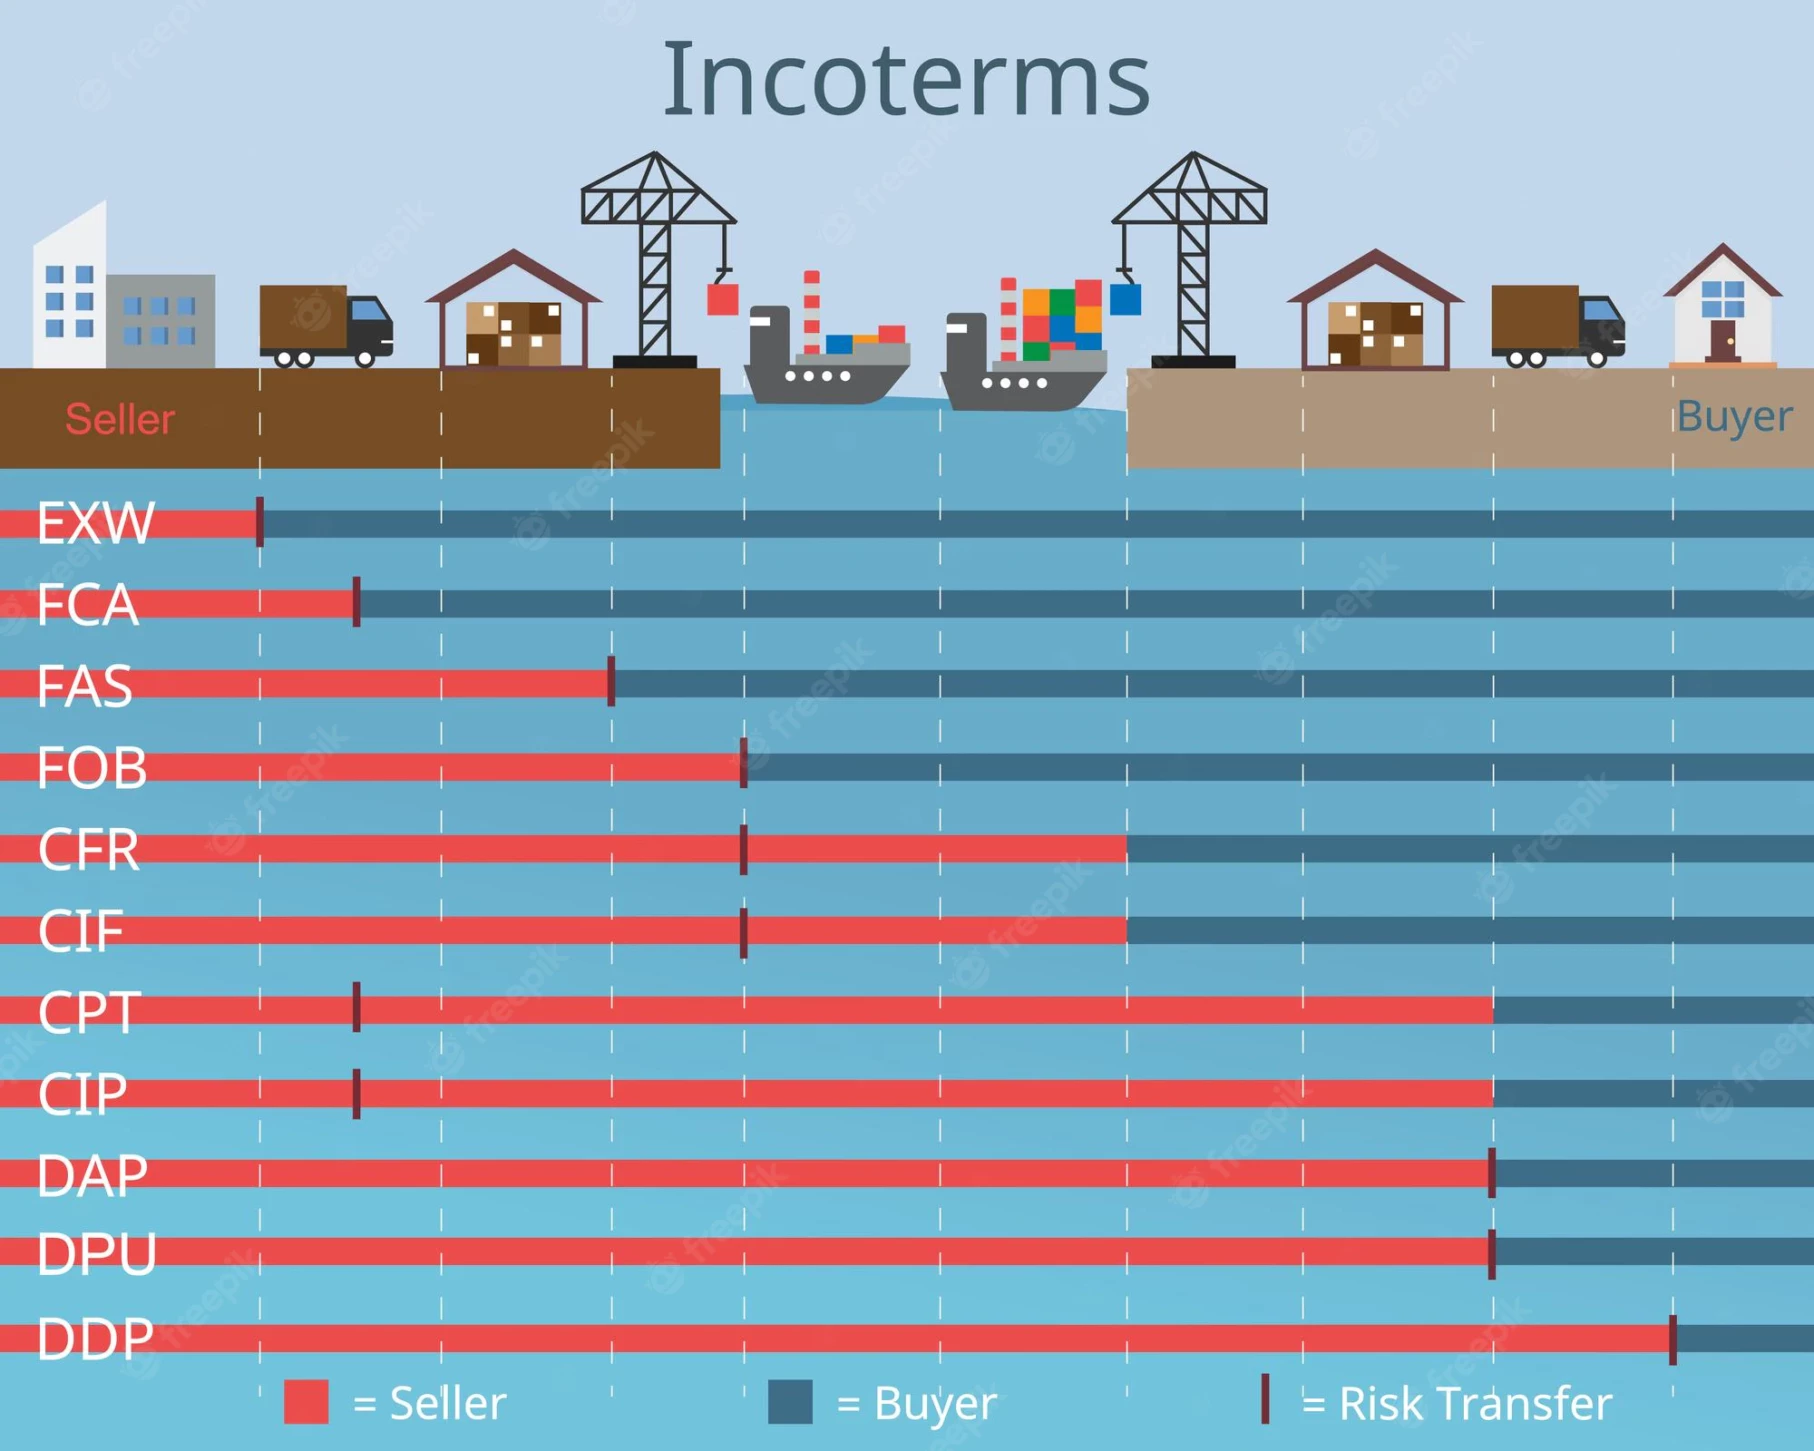 Image showing the different INCOTERMS